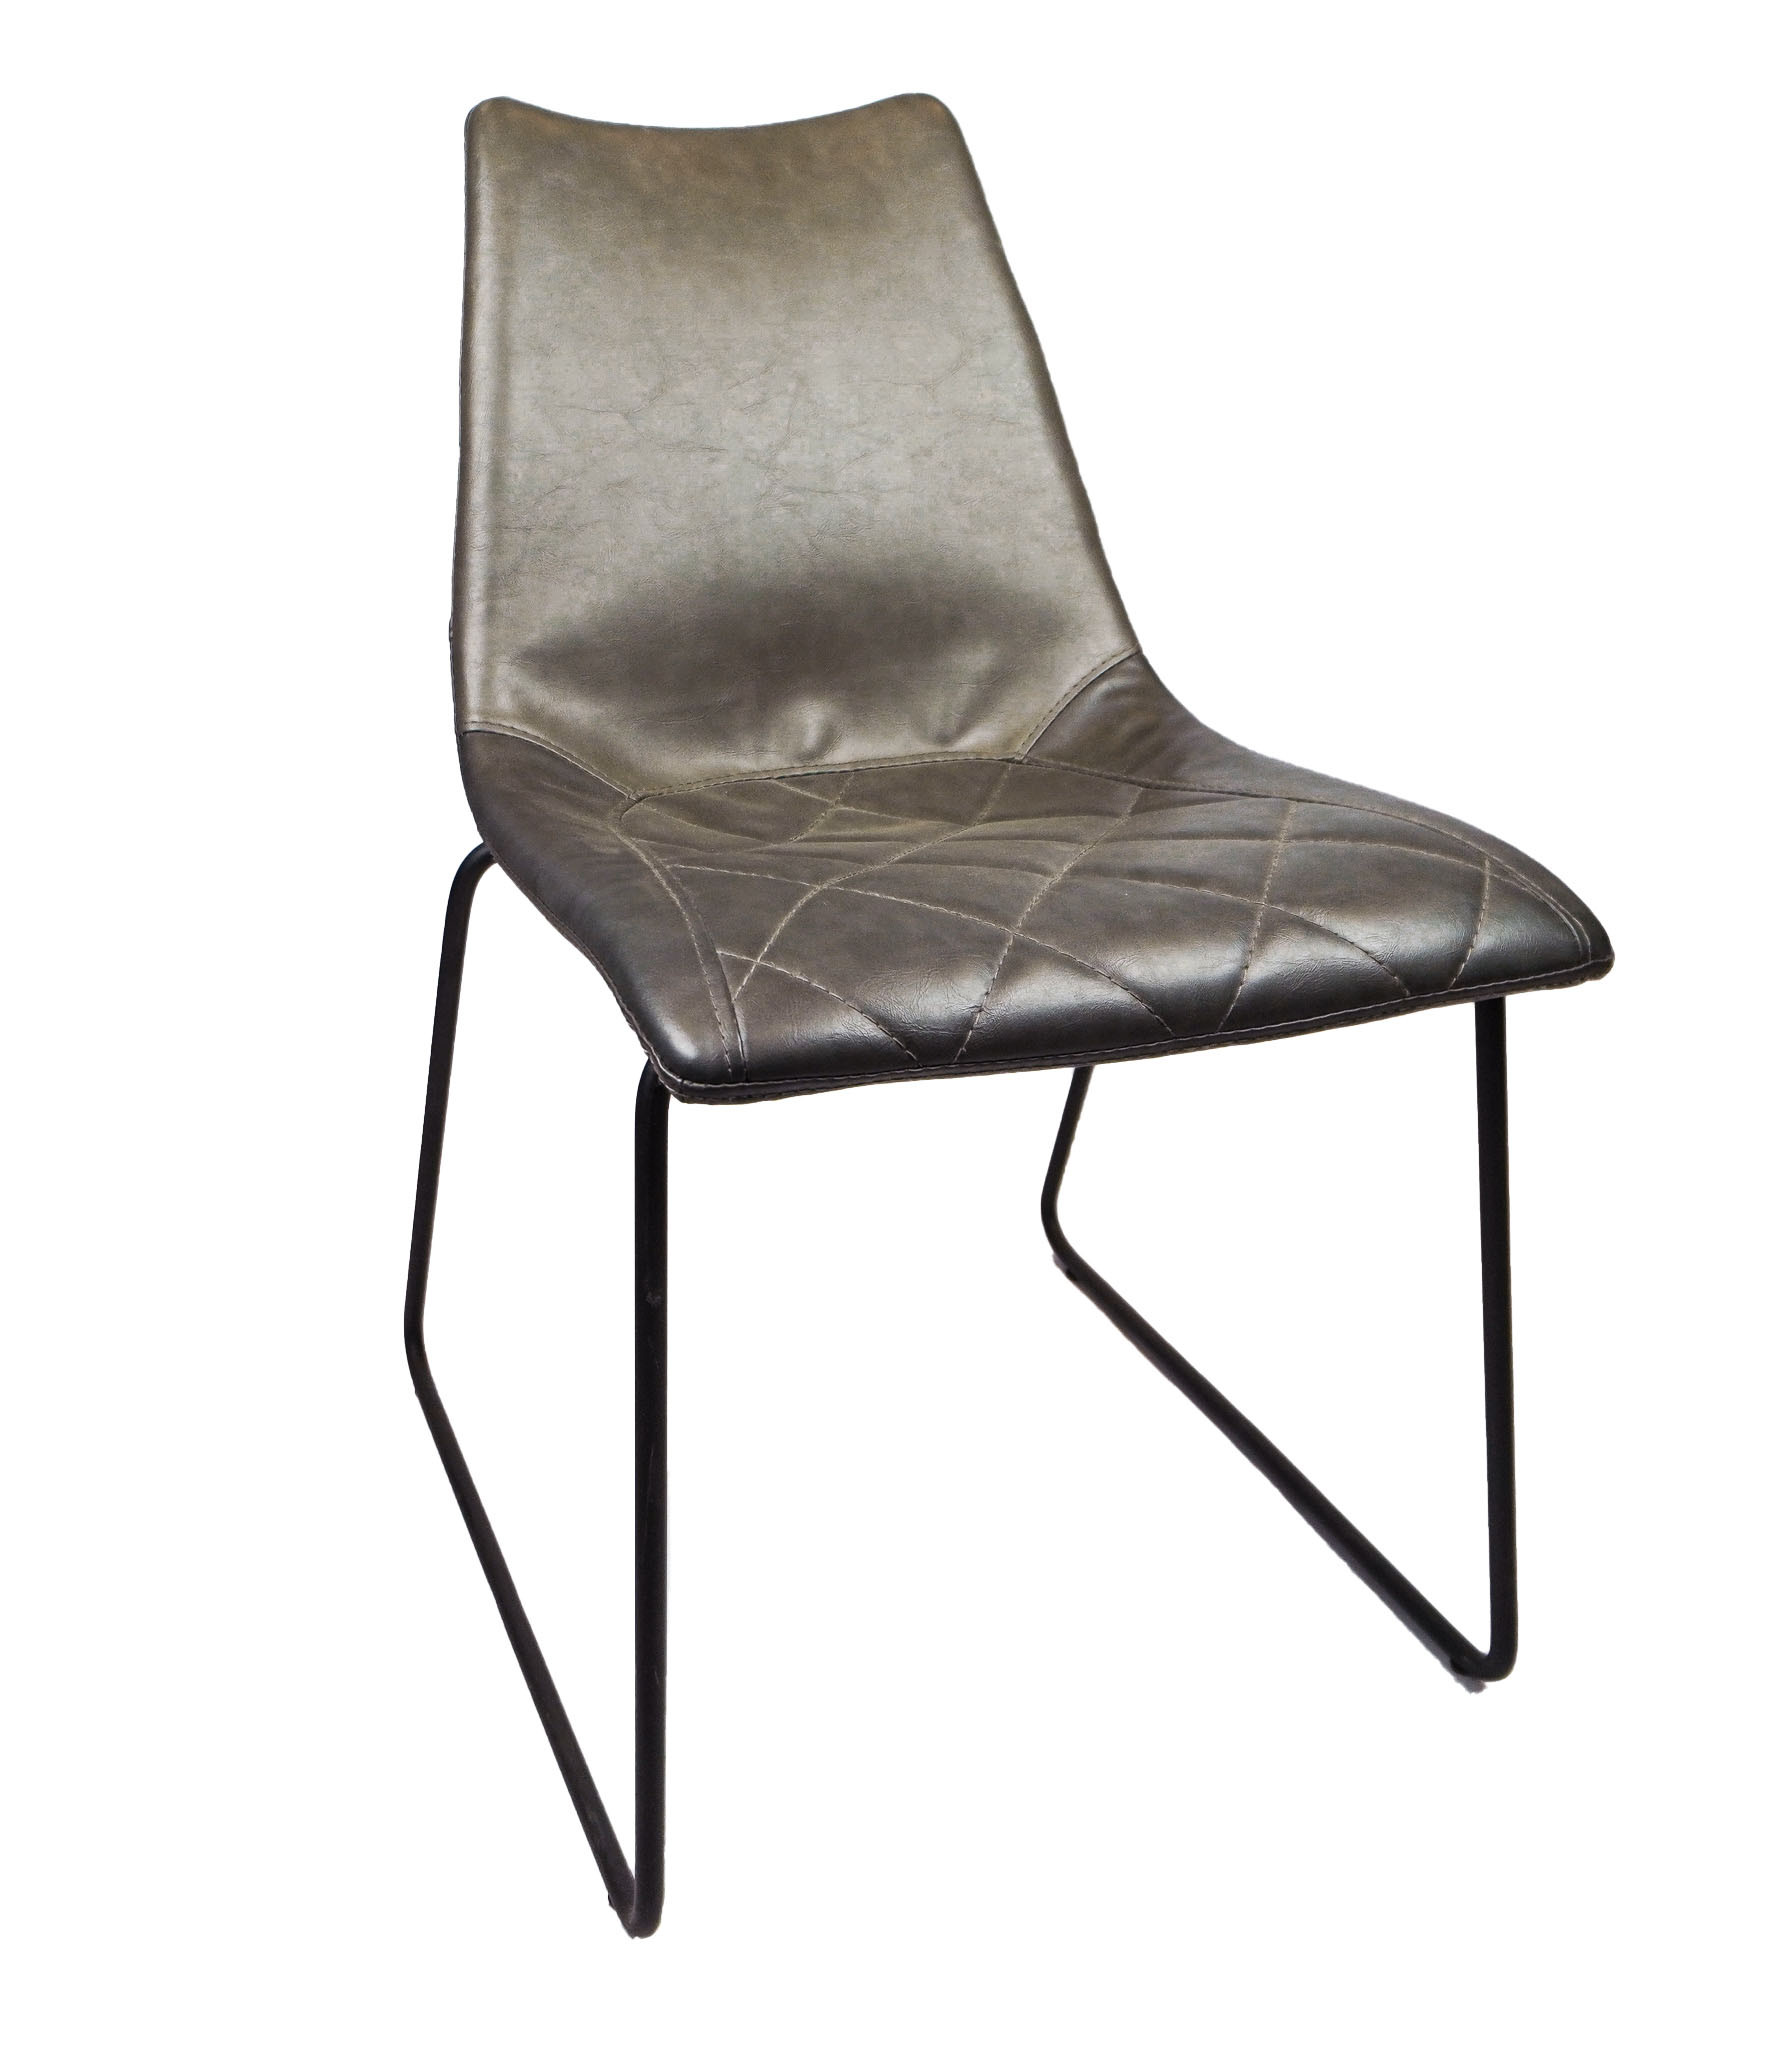 Rent a Dining chair Lerida anthracite? Rent at KeyPro furniture rental!